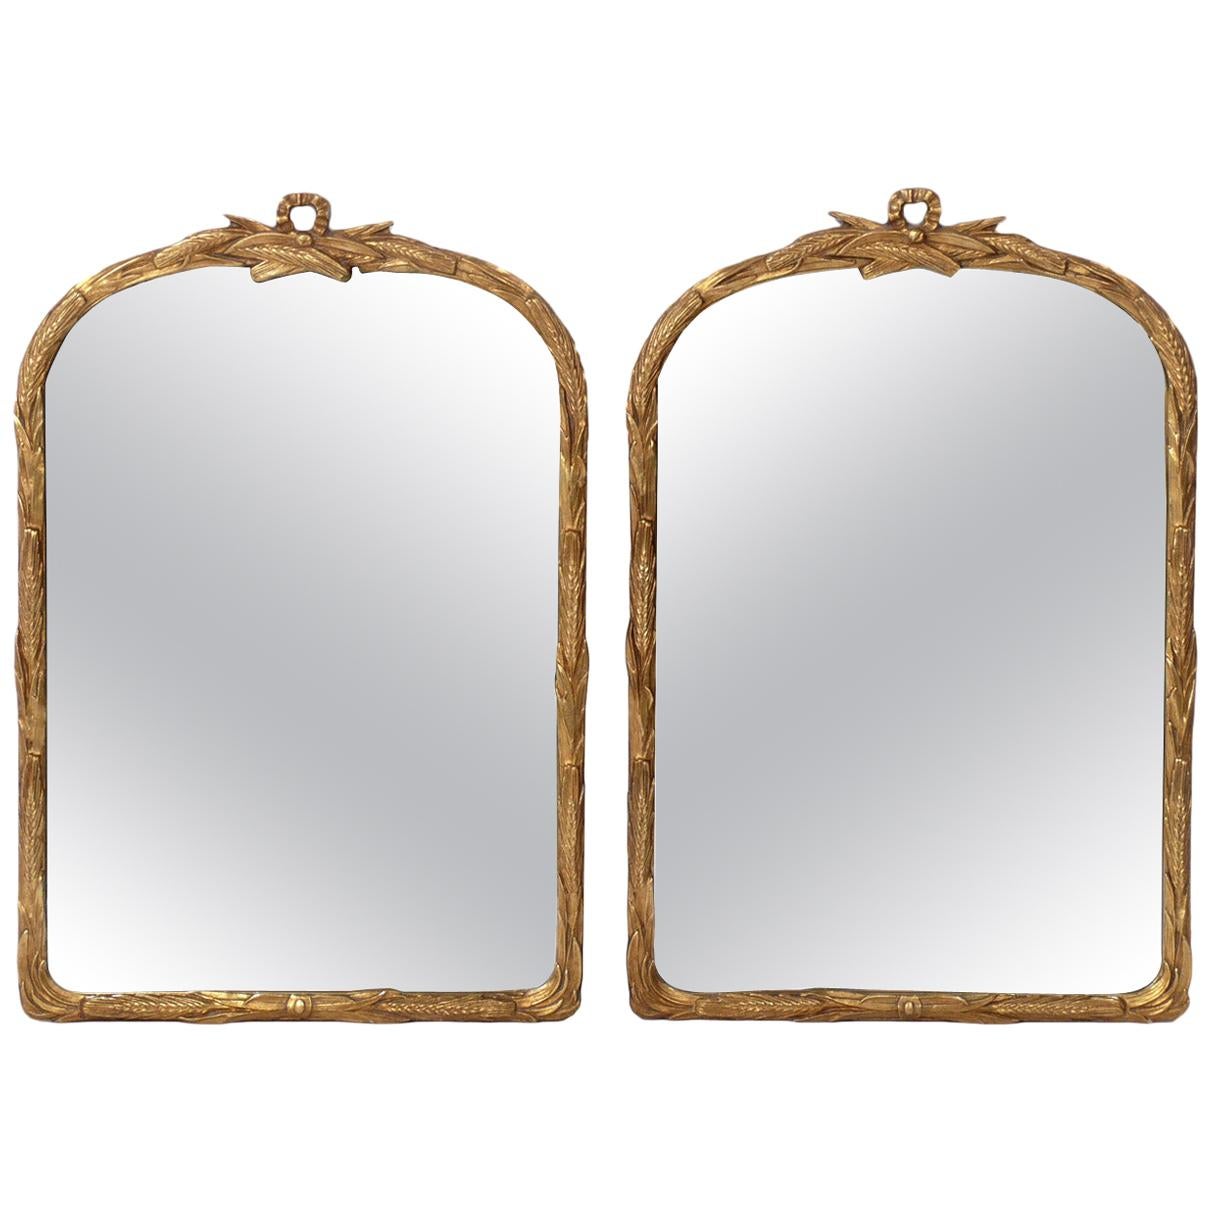 Pair of Gilt French Mirrors